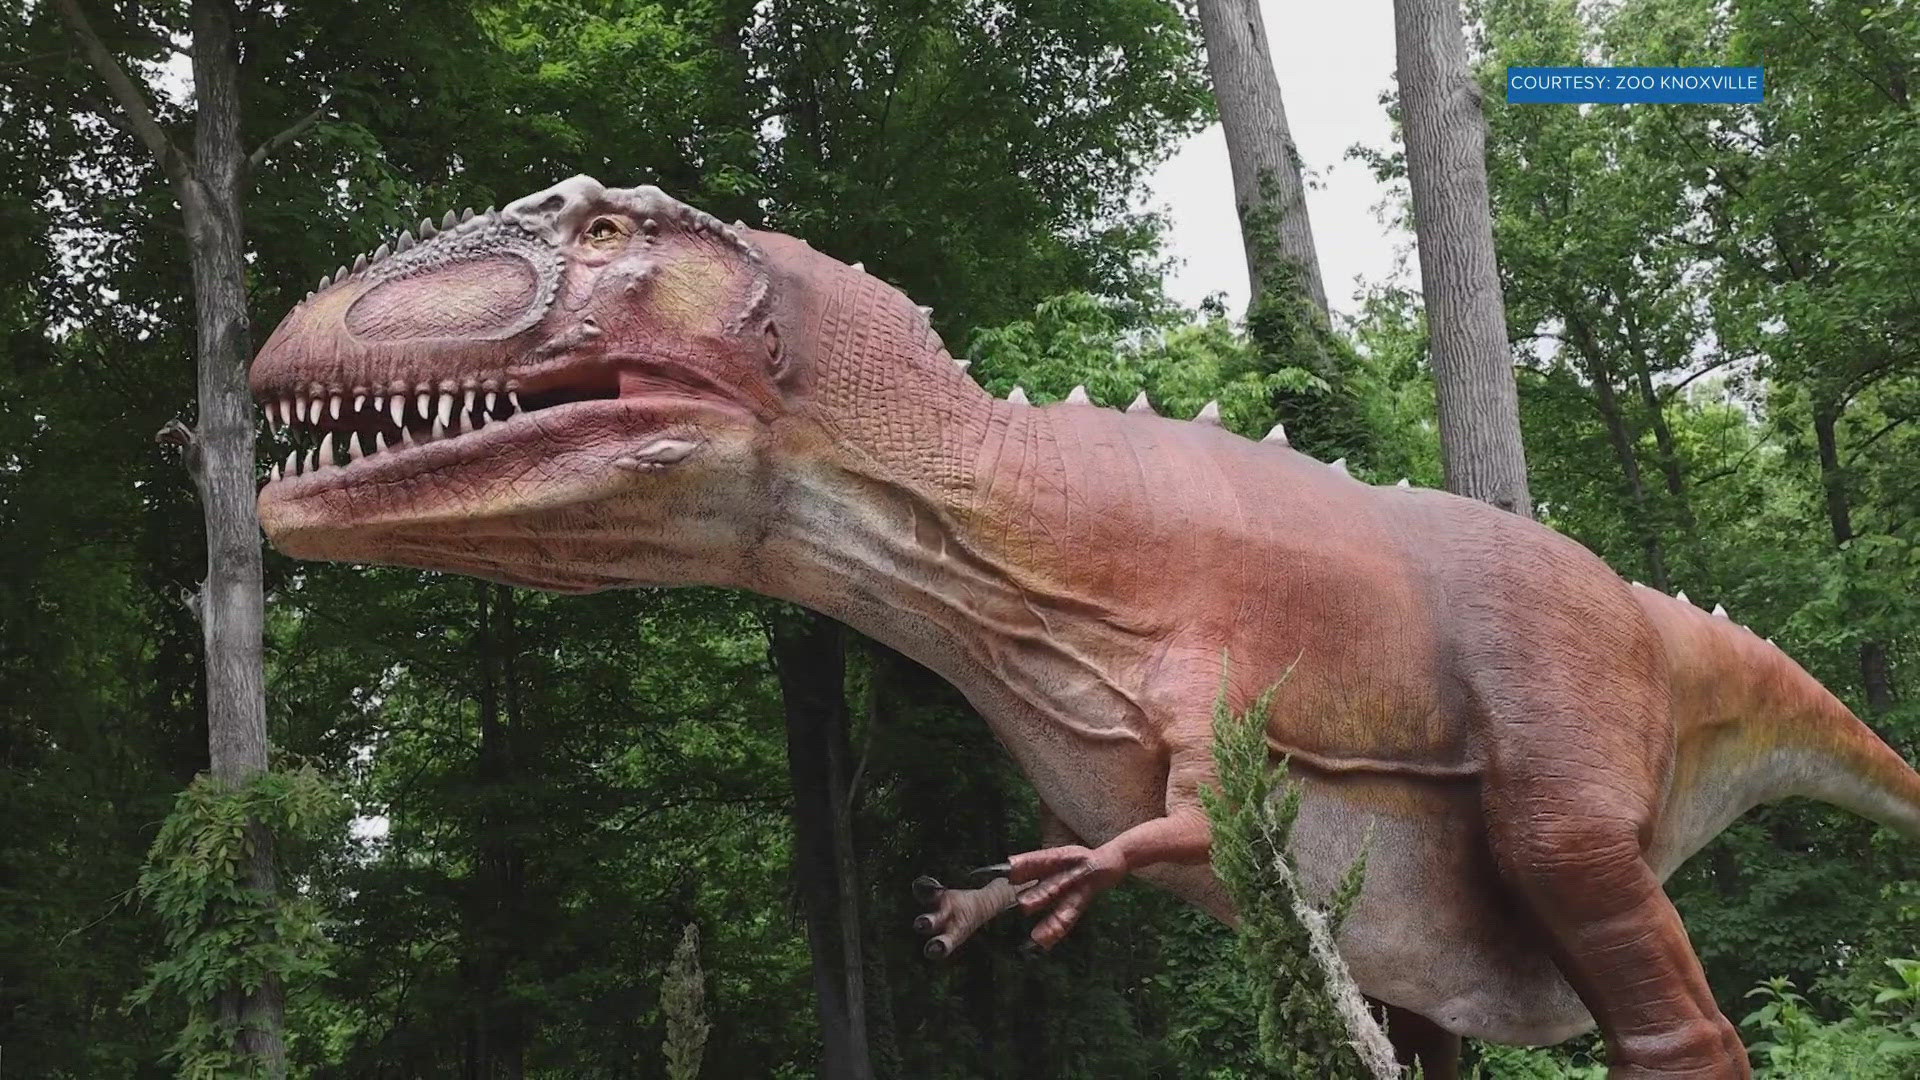 "Transporting guests back in time to eras long past, Planet Predator features an array of animatronic predators from the ancient world," the zoo said.